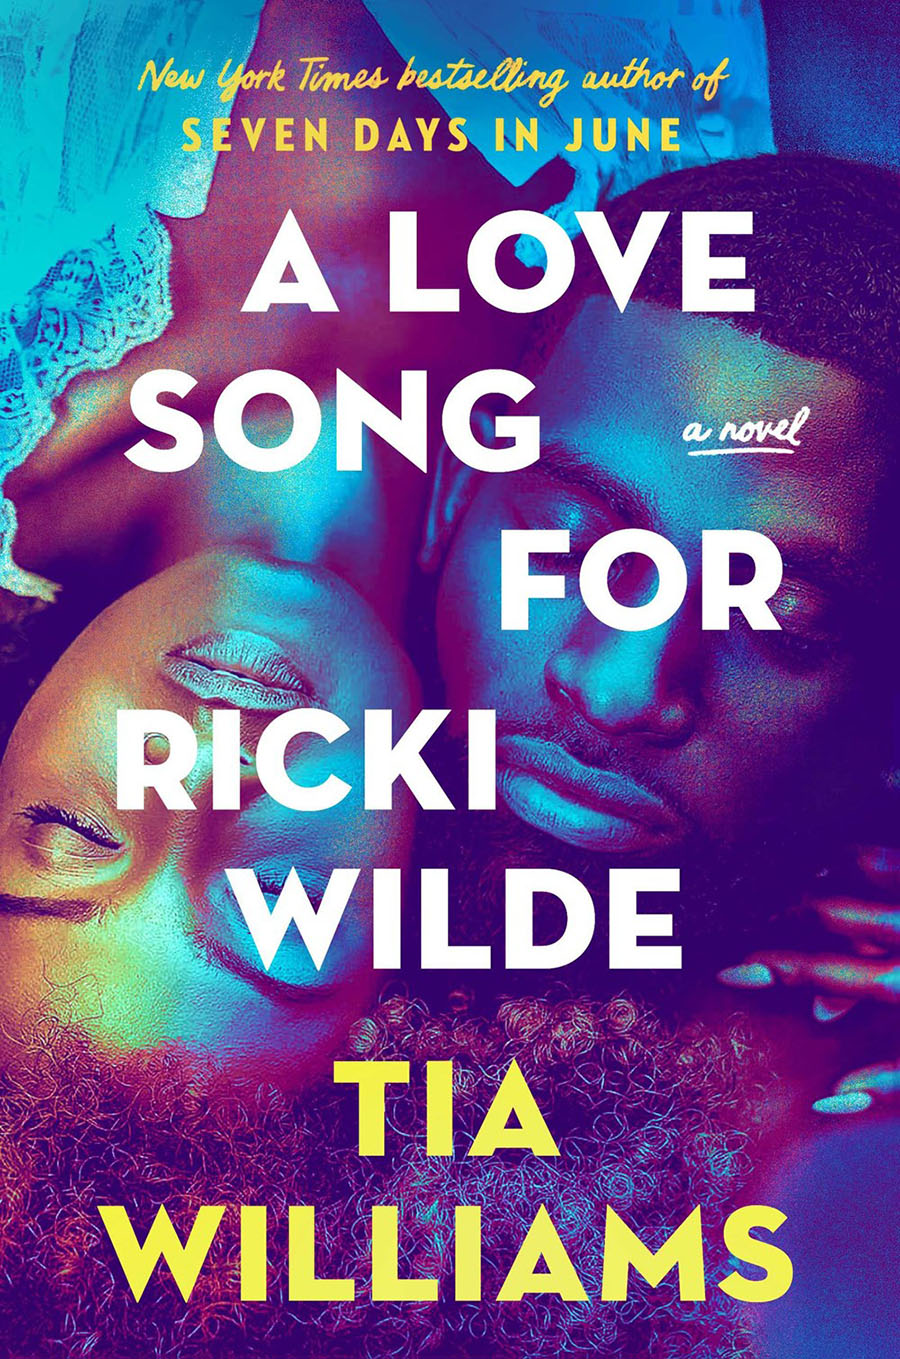 a-love-song-for-ricki-wilde